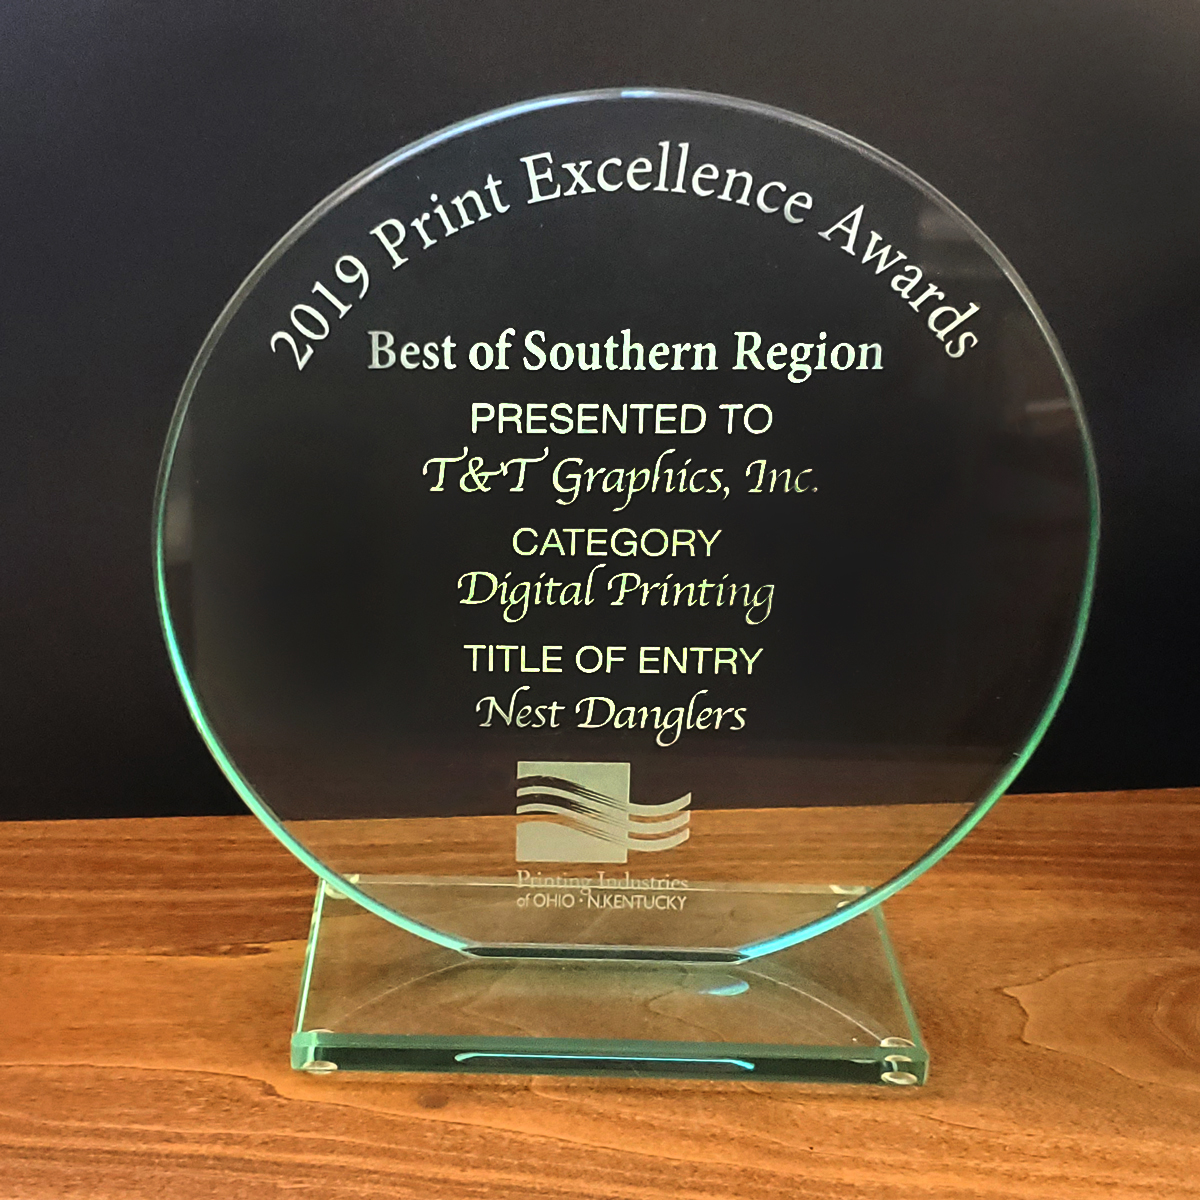 Digital Printing Excellence